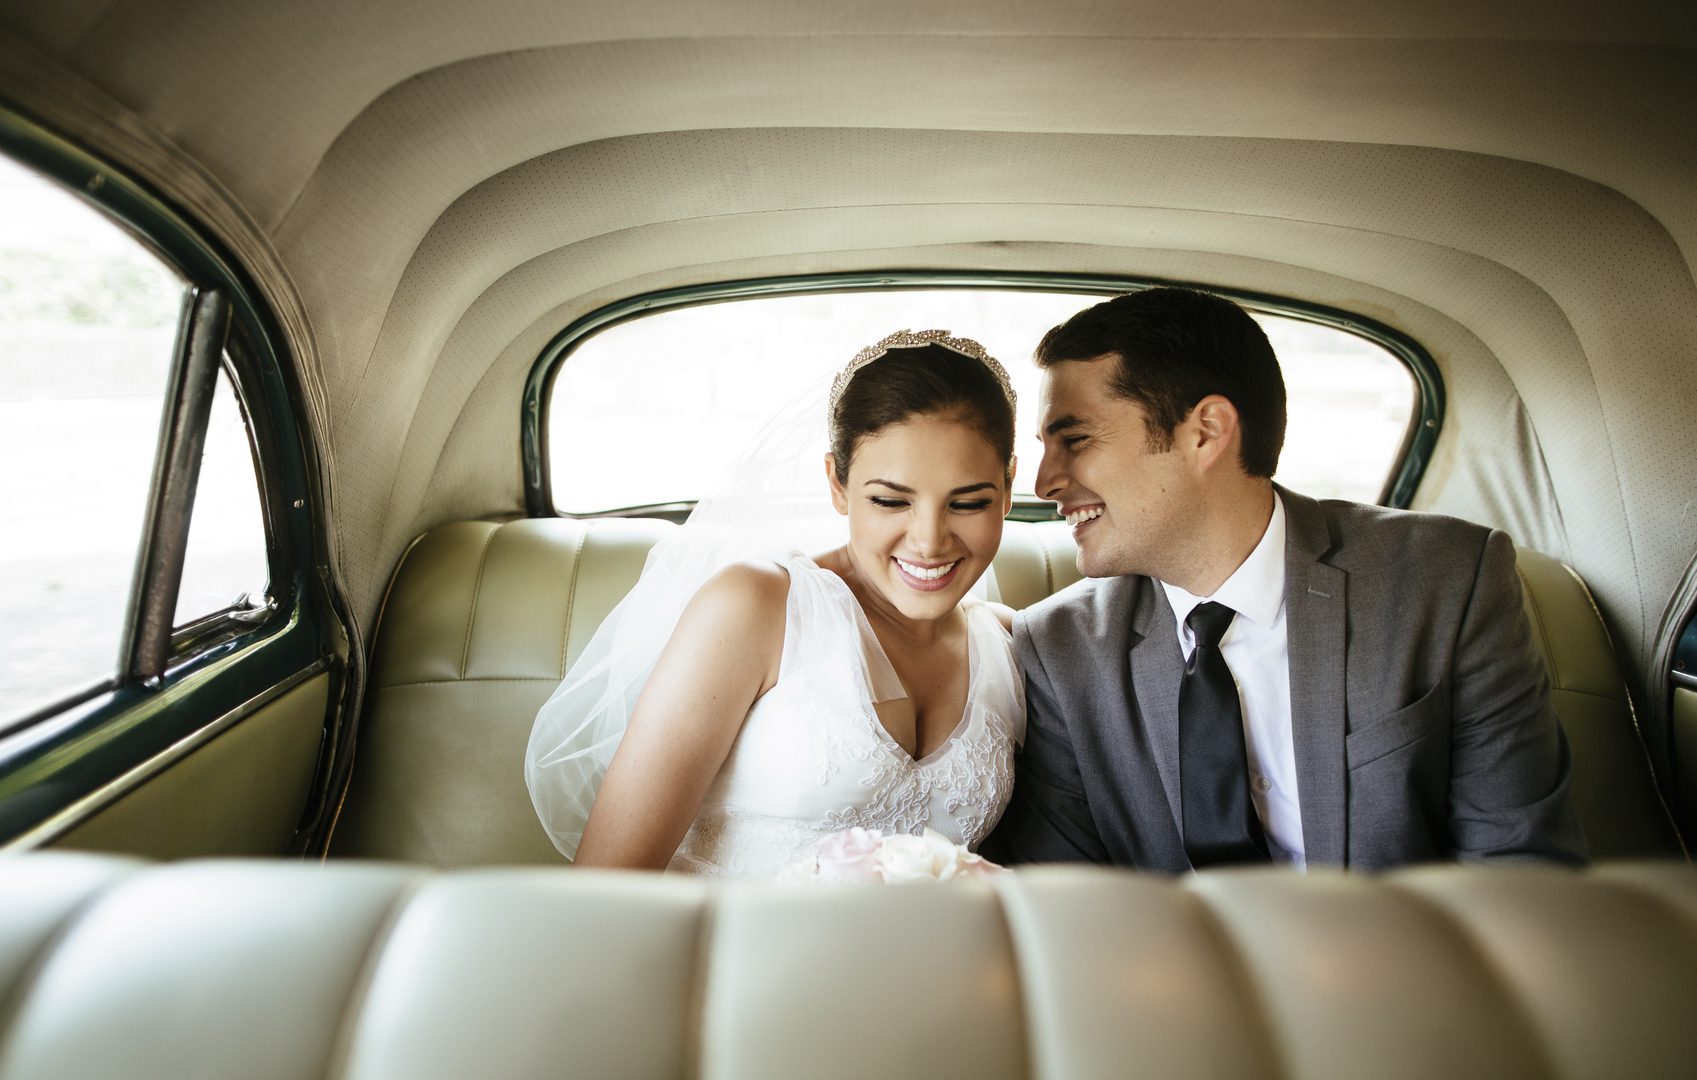 Newly married couple in their wedding clothes in the back of a car